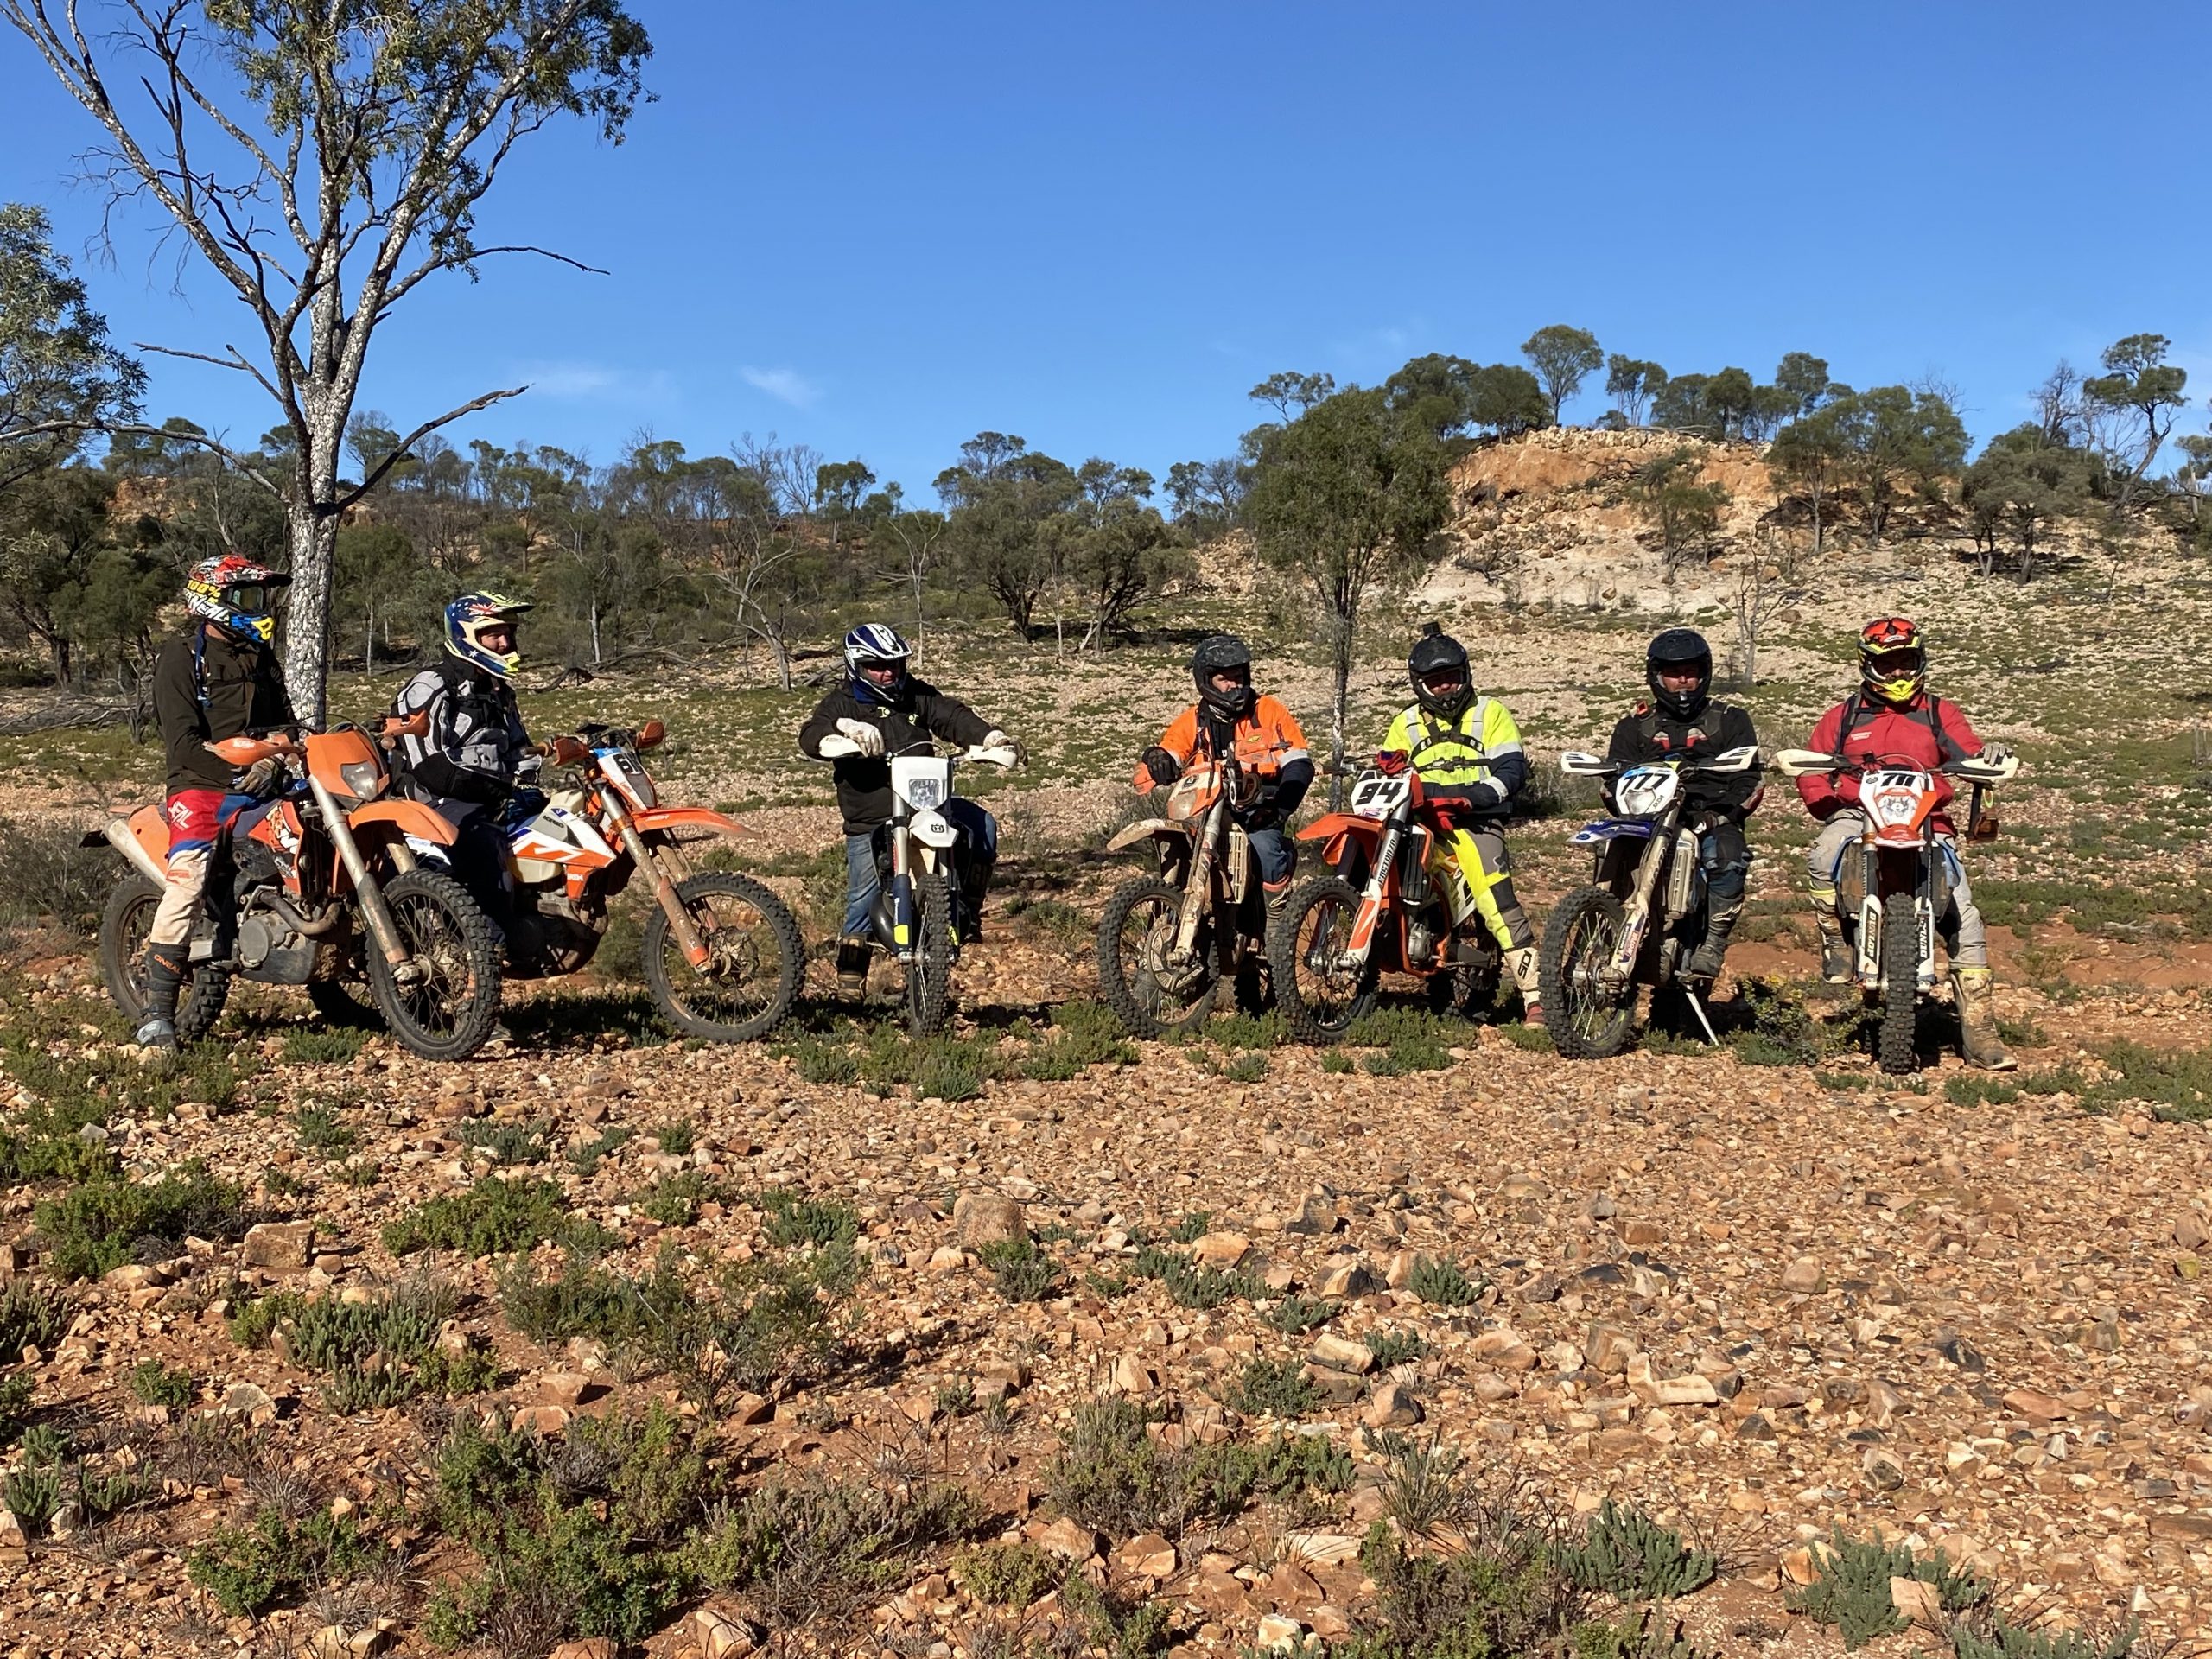 A group of dirt bike riders sitting on their bikes